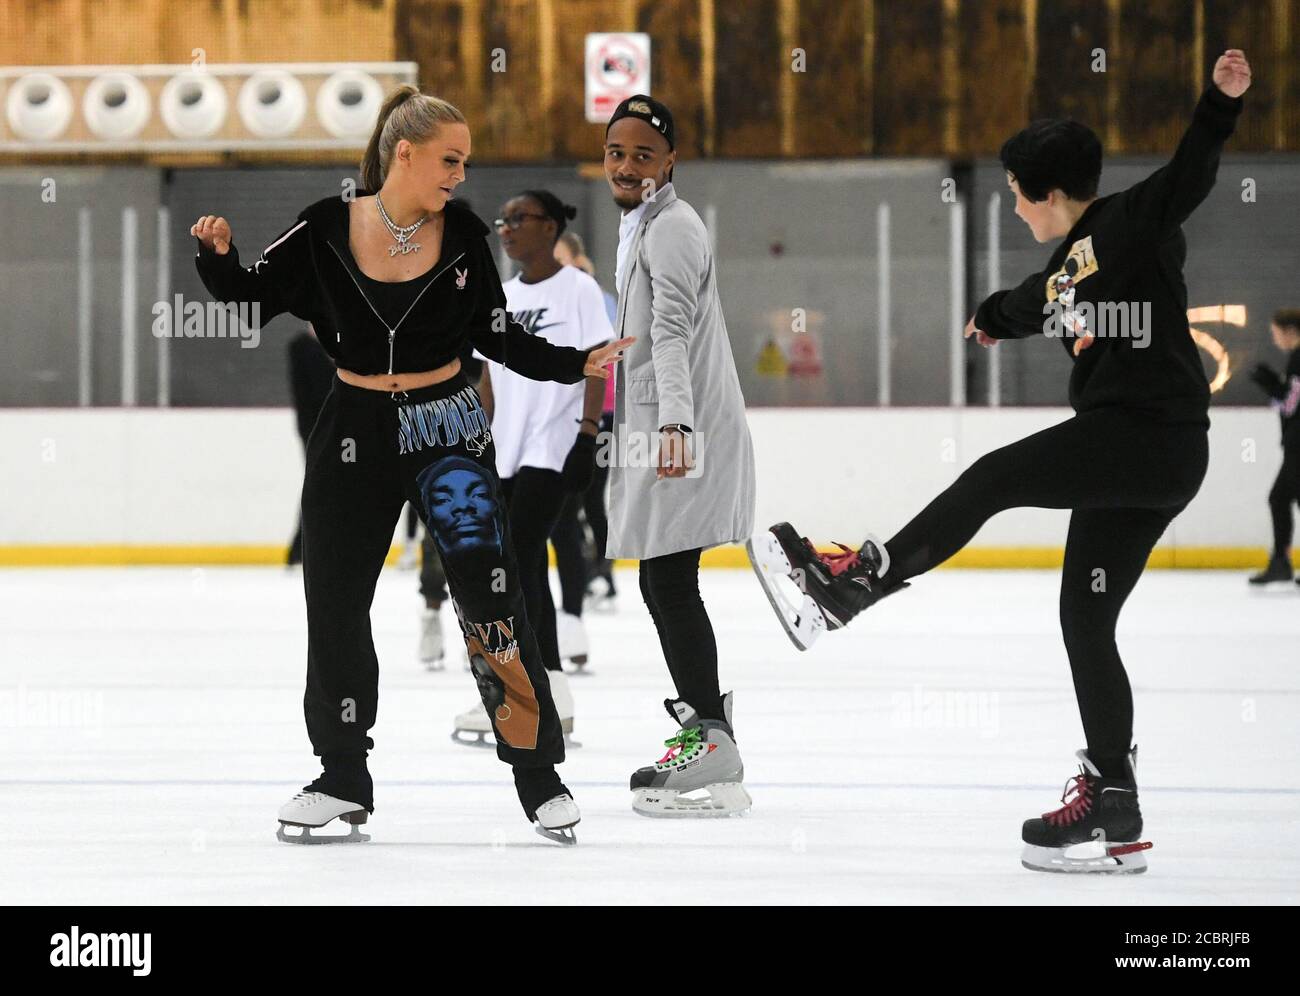 People ice skate at the Streatham Ice and Leisure Centre in Streatham, south London, as coronavirus lockdown measures continue to be eased in England. Stock Photo